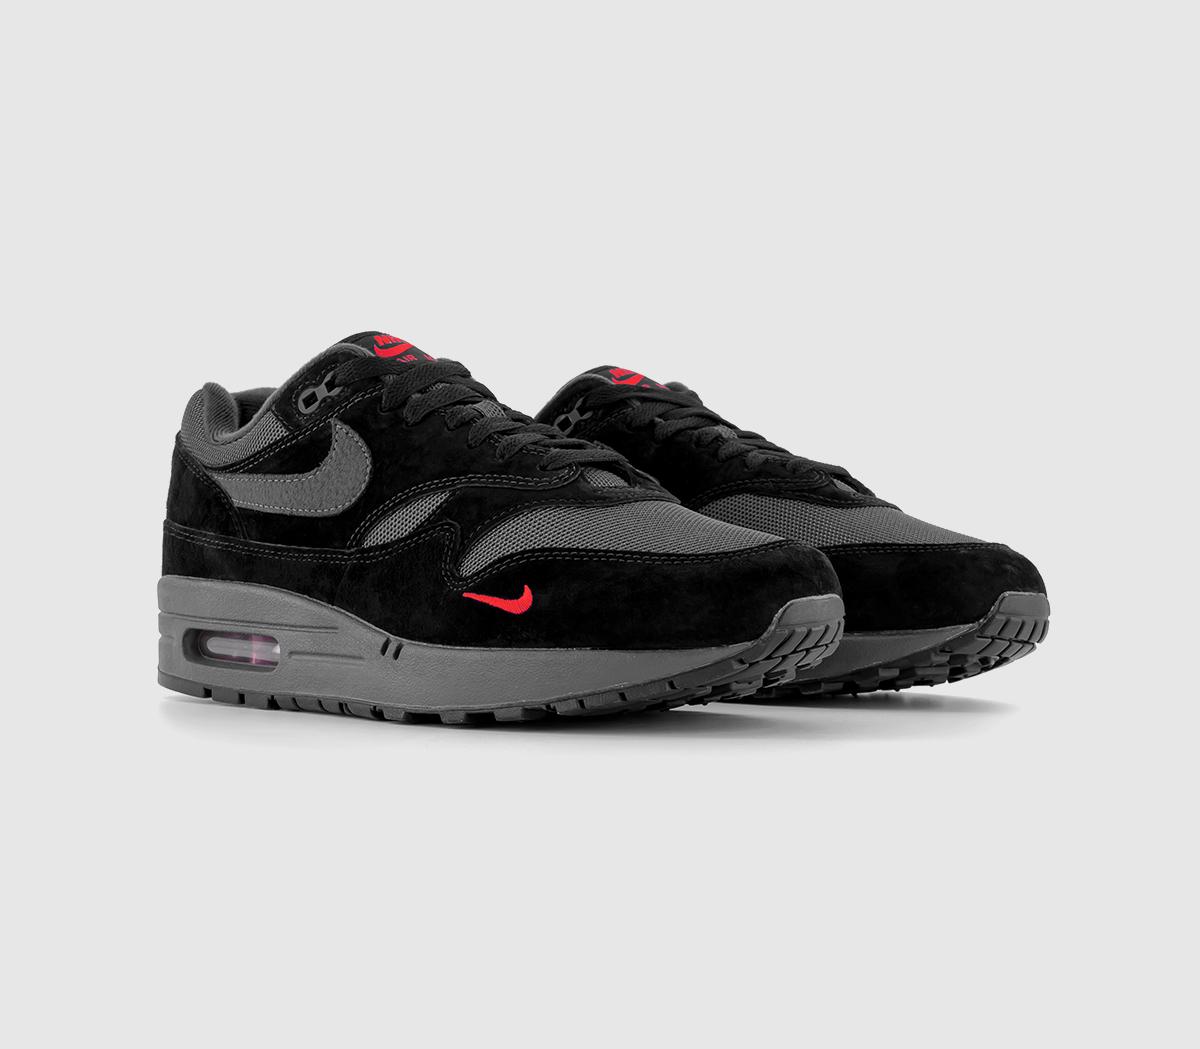 Nike Air Max 1 Trainers Black Anthracite University Red, 8